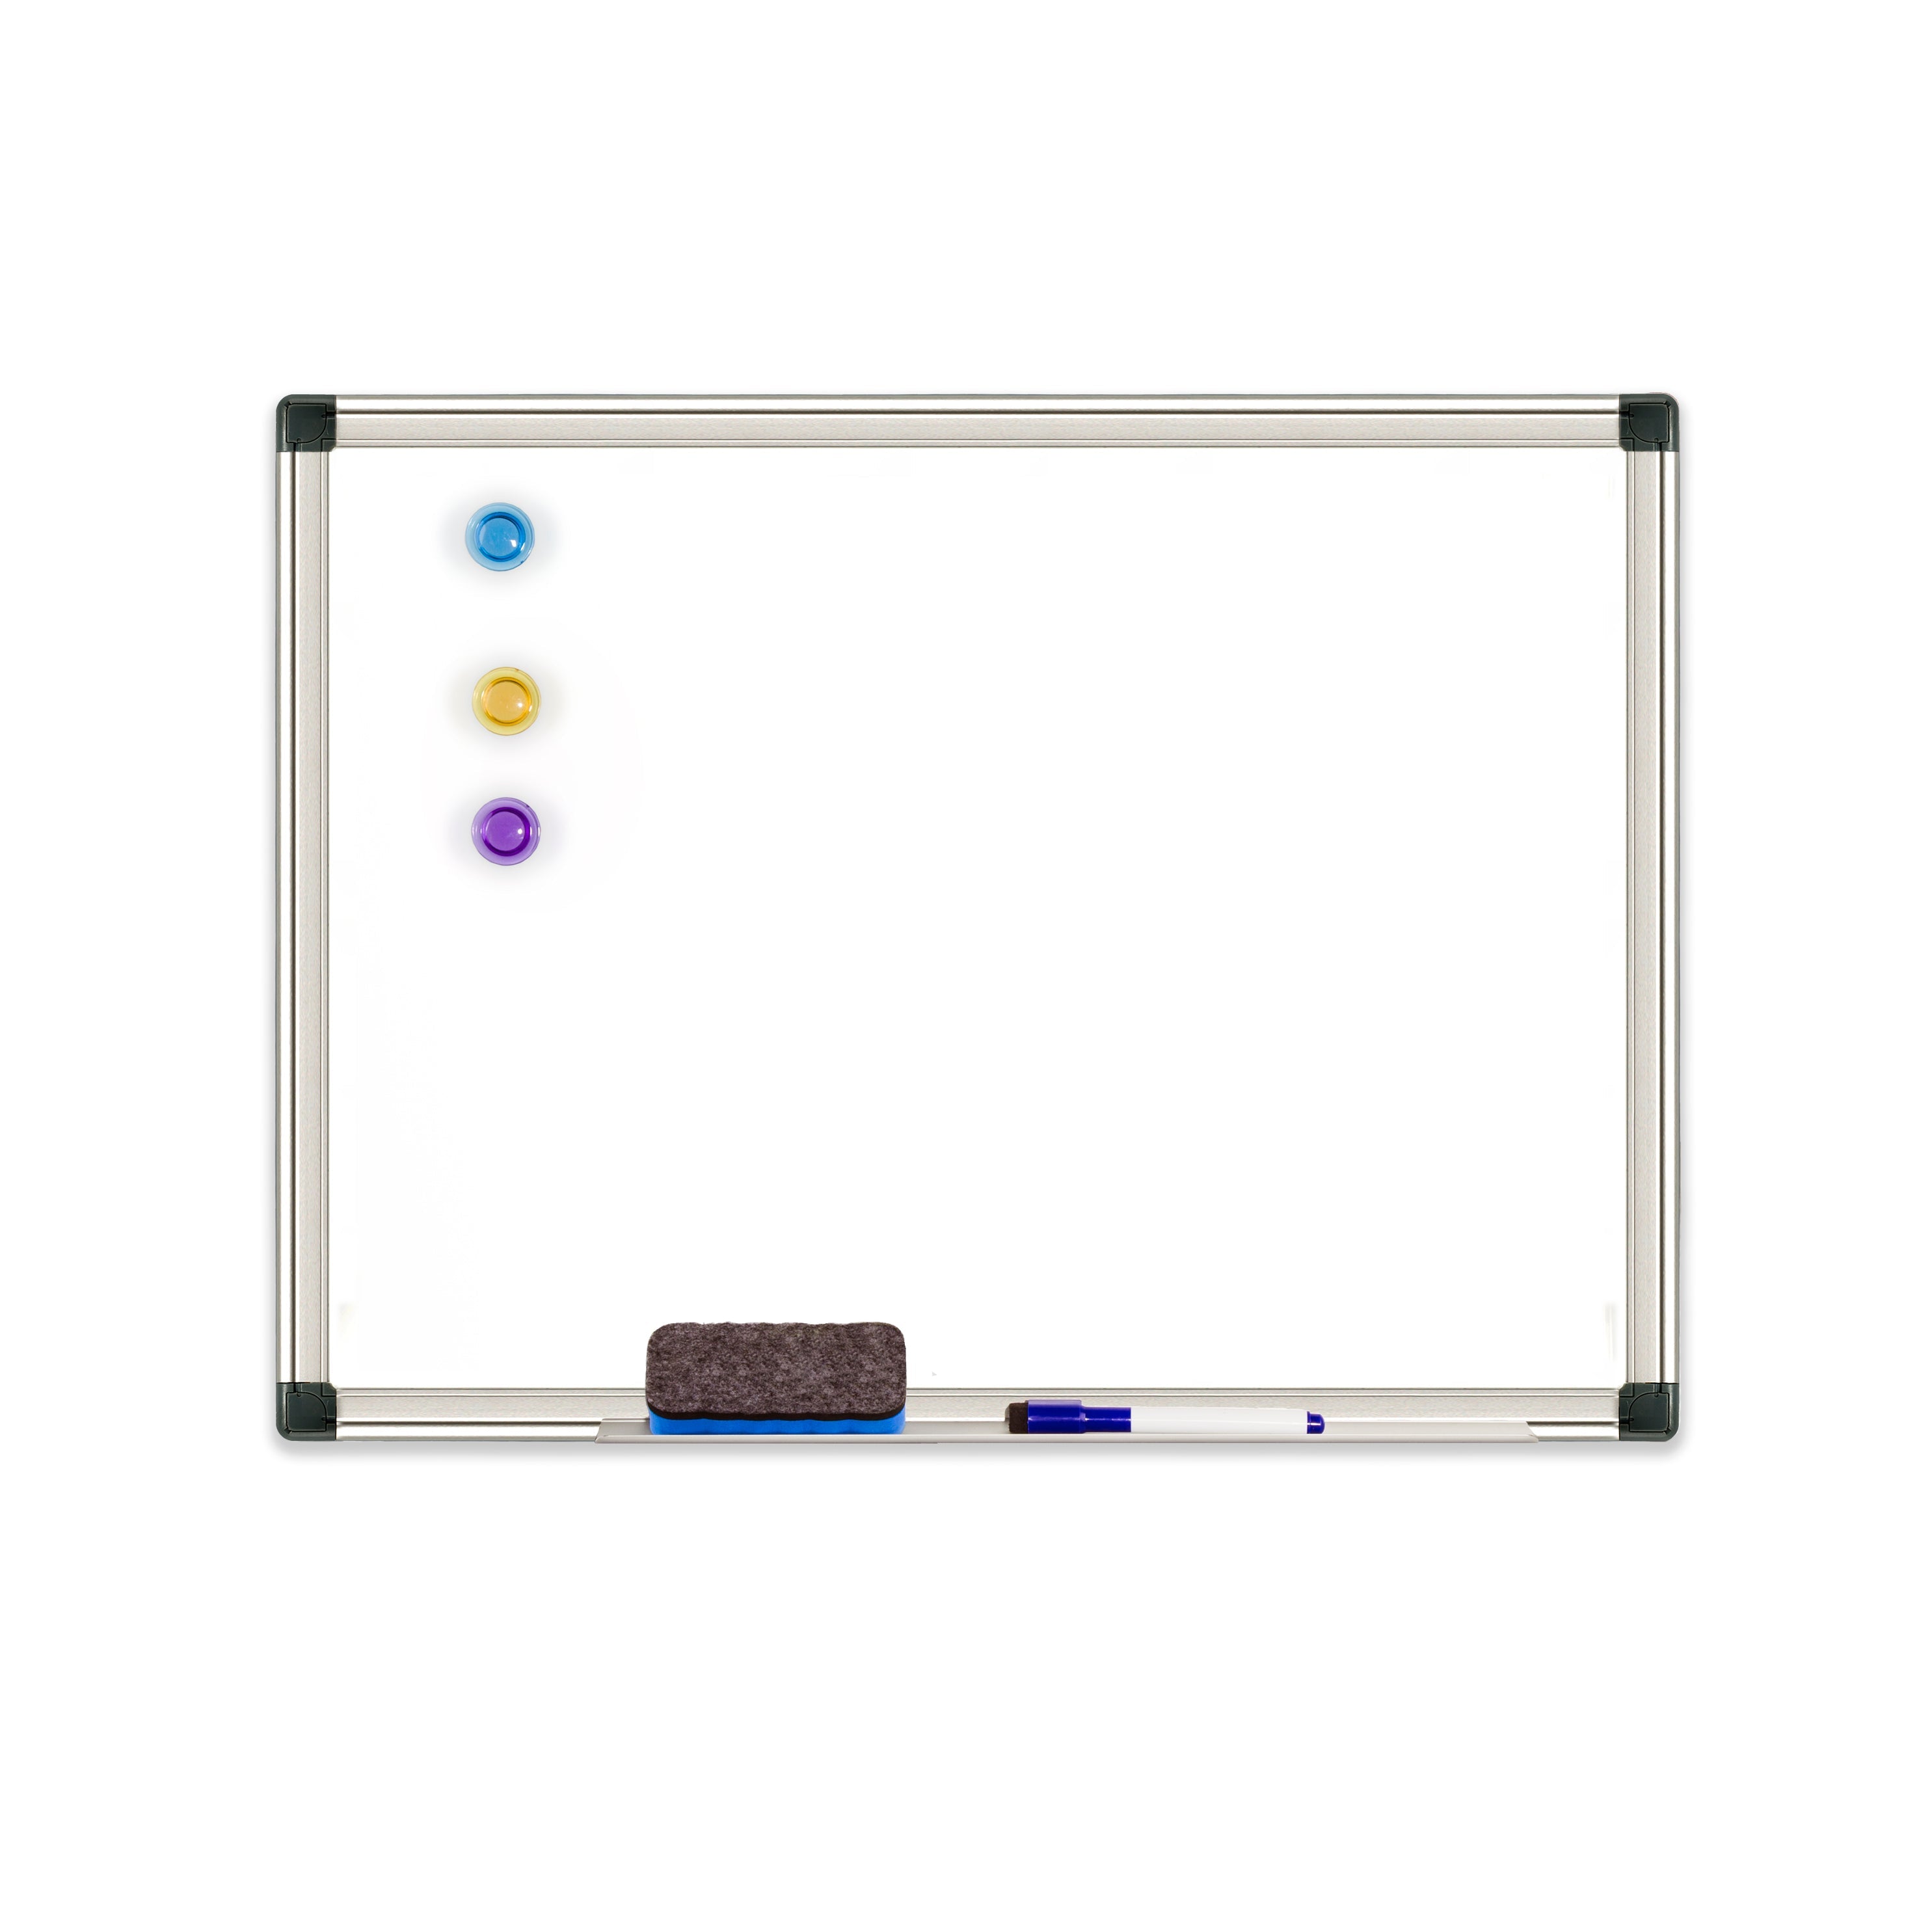 M27 wall mounted dry-erase magnetic whiteboard for home office school - Premium magnetic whiteboard from Madic Whiteboard - Madic Whiteboard